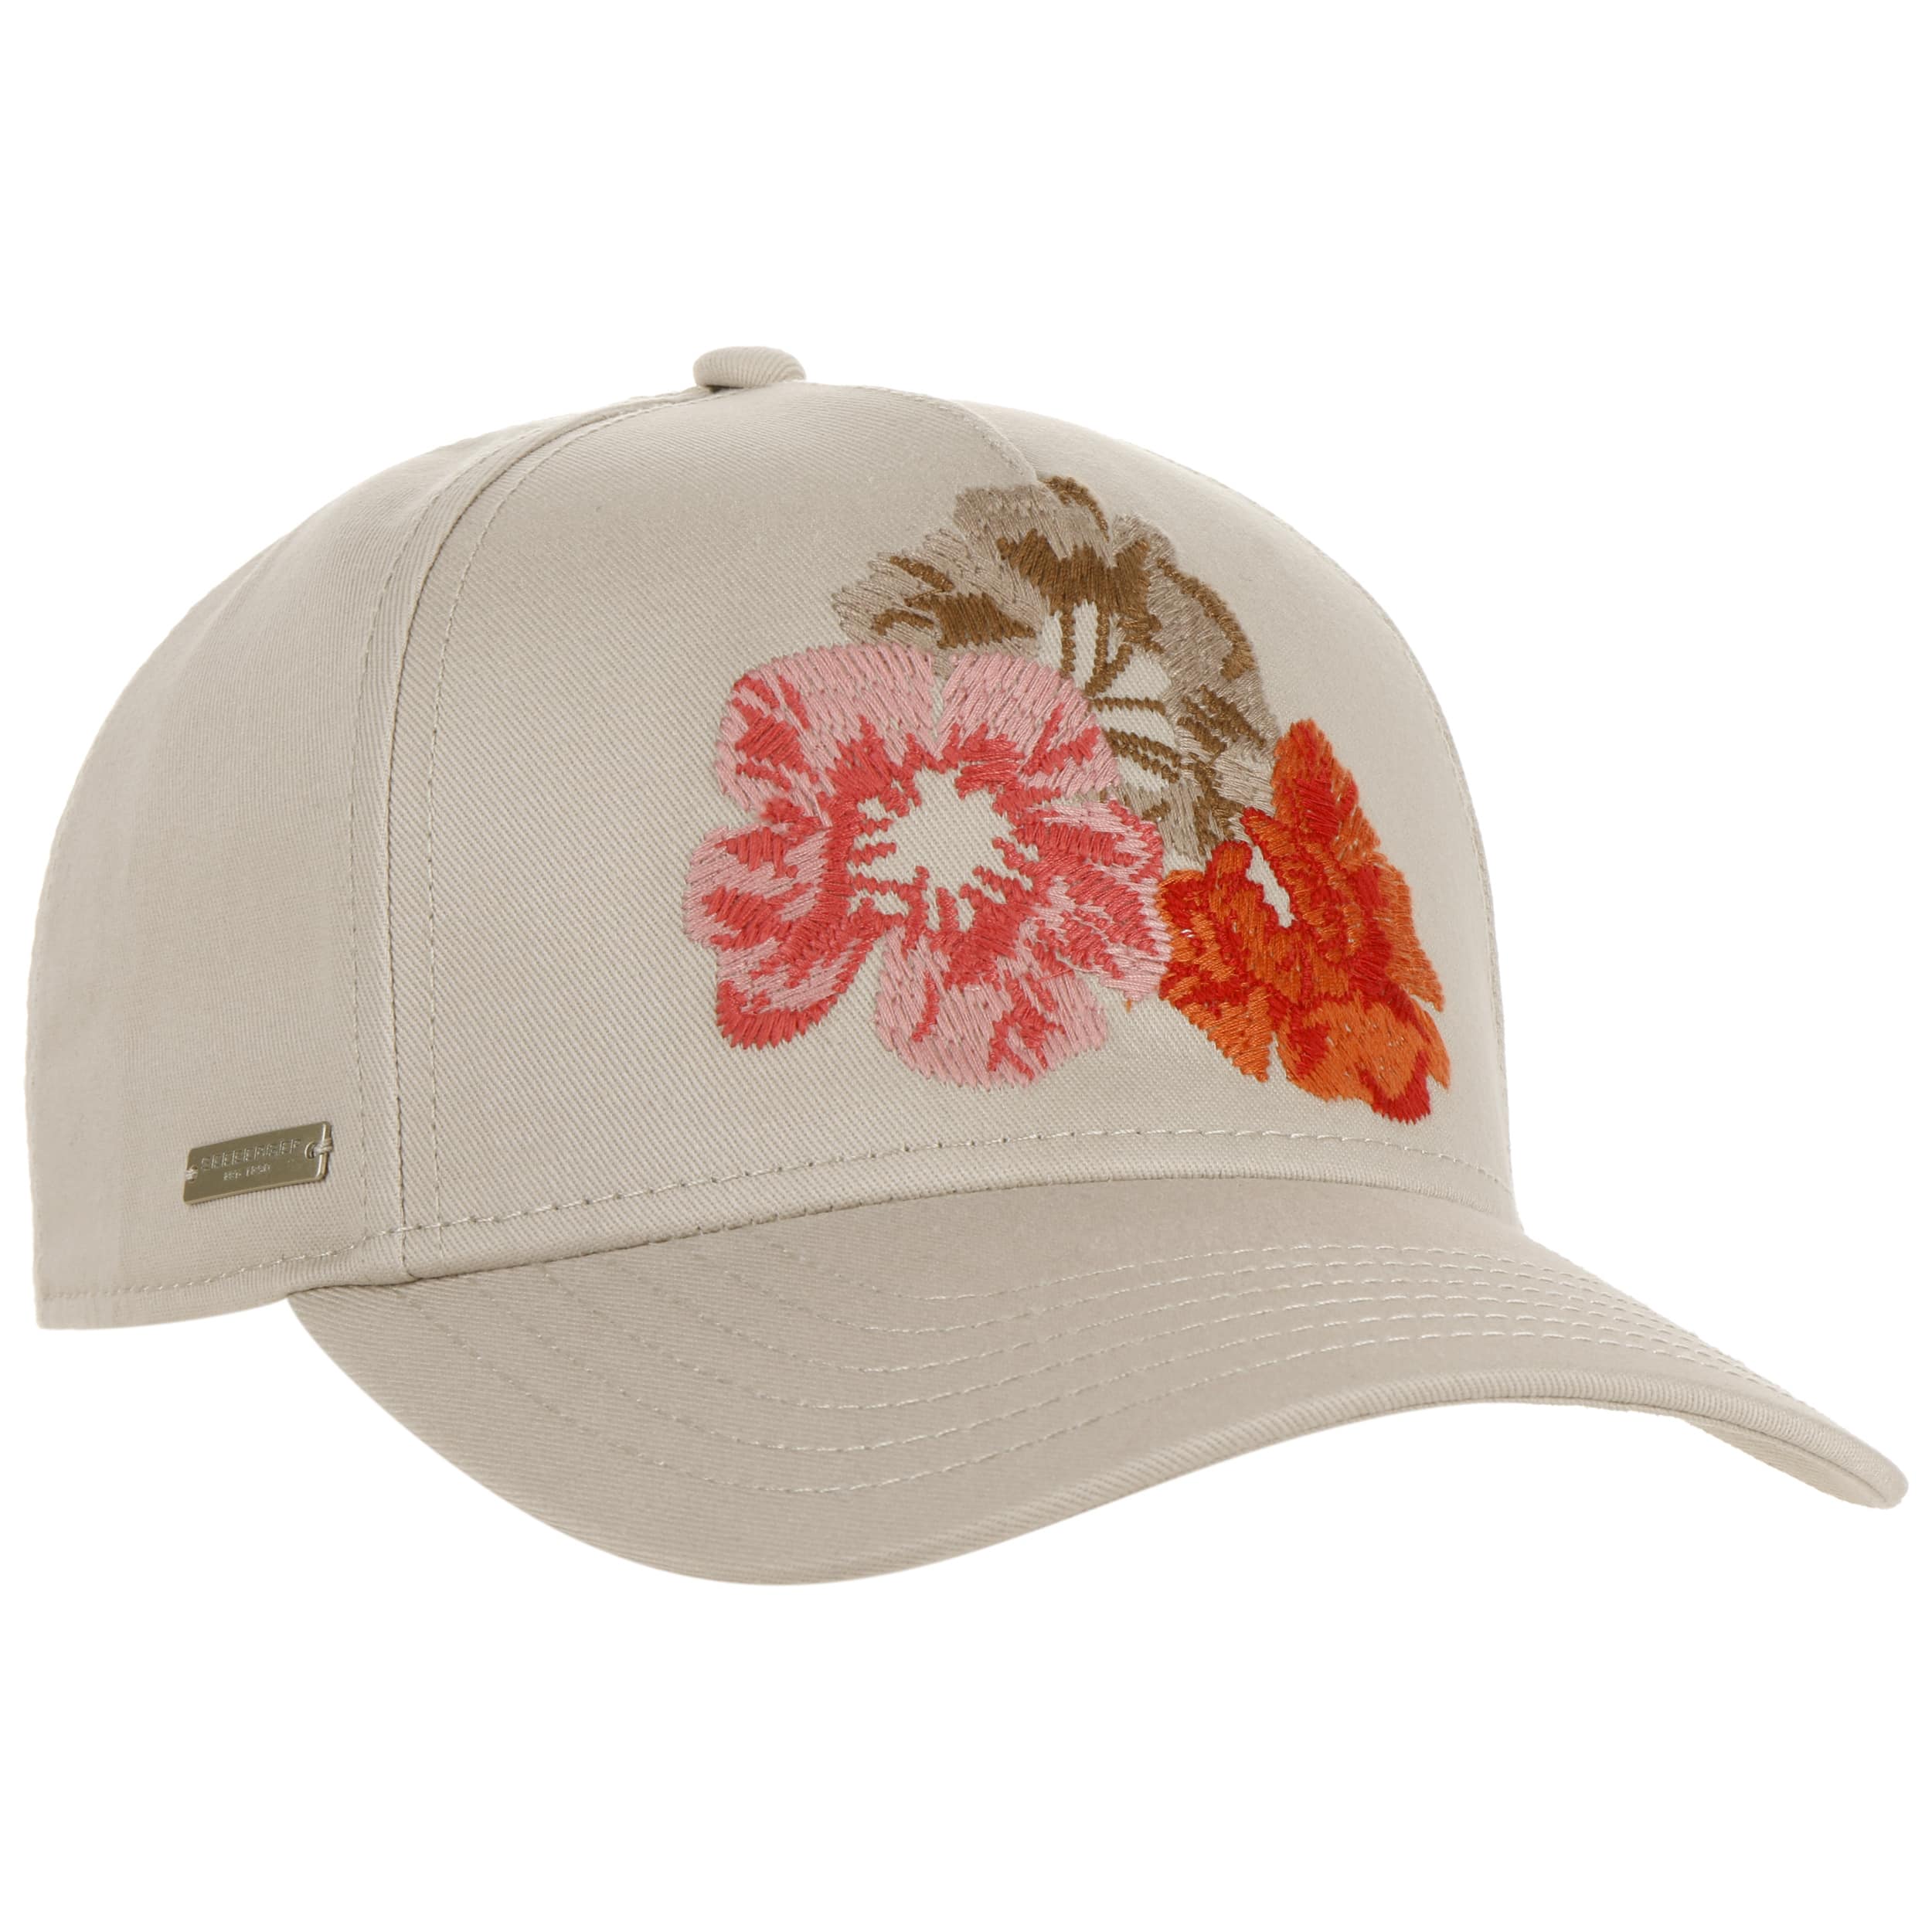 Stitched Flowers Cap by Seeberger 29,95 € 